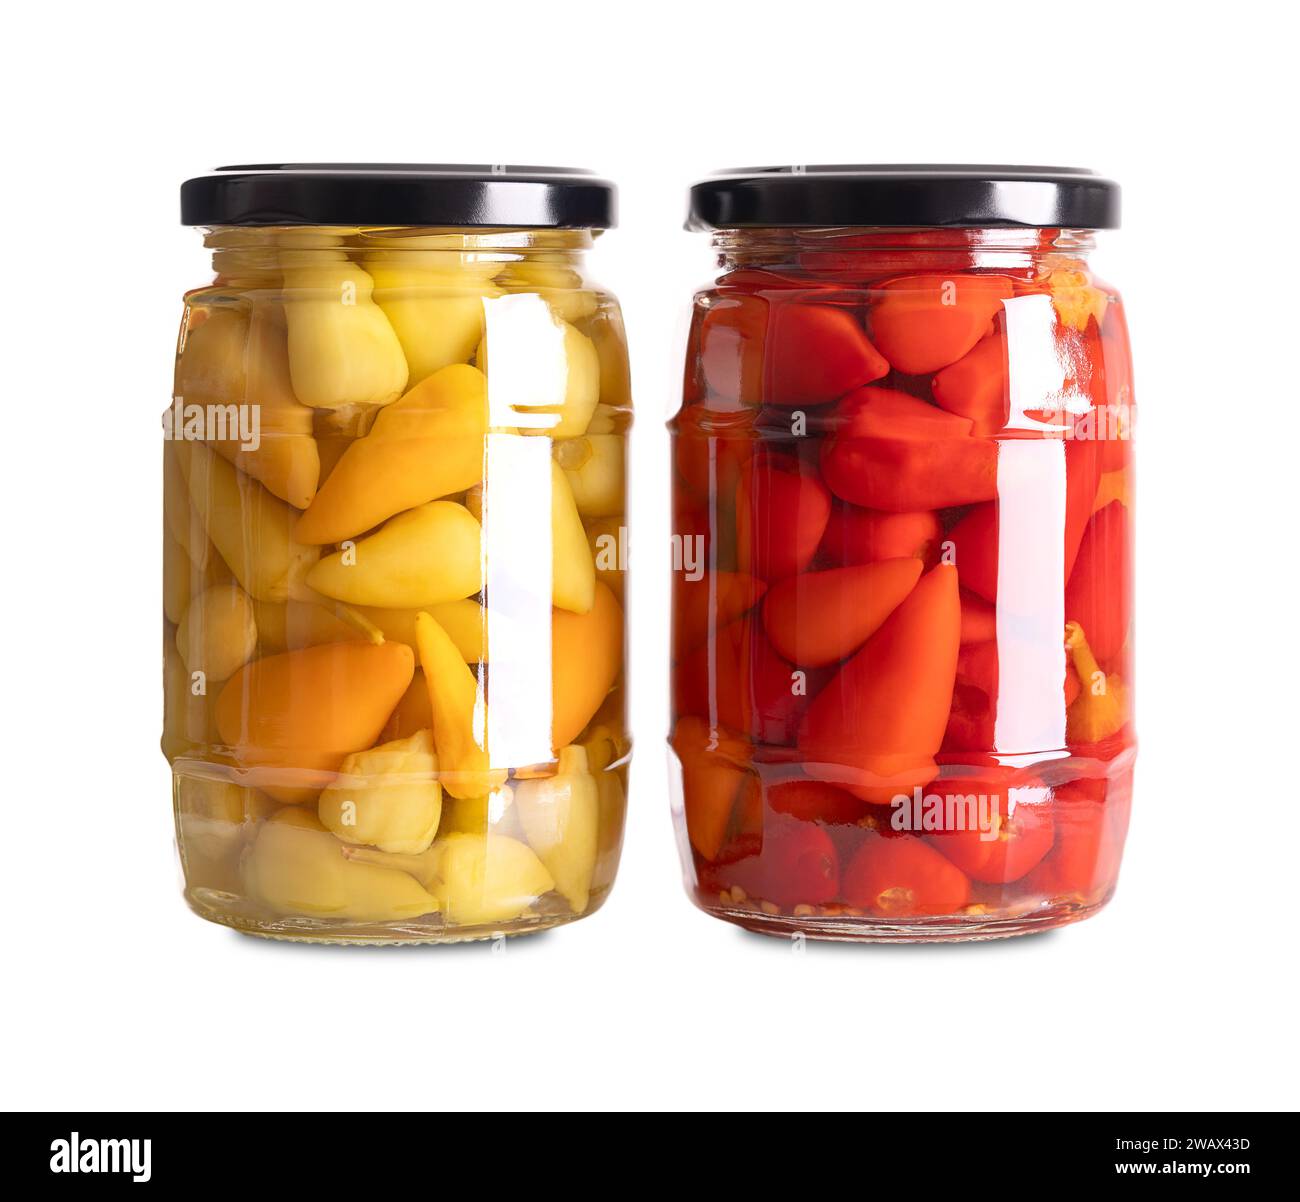 Yellow and red hot baby peppers pickled in glass jars. Two glasses with small hot chilis or pepperonis, pasteurized and preserved in a brine. Stock Photo